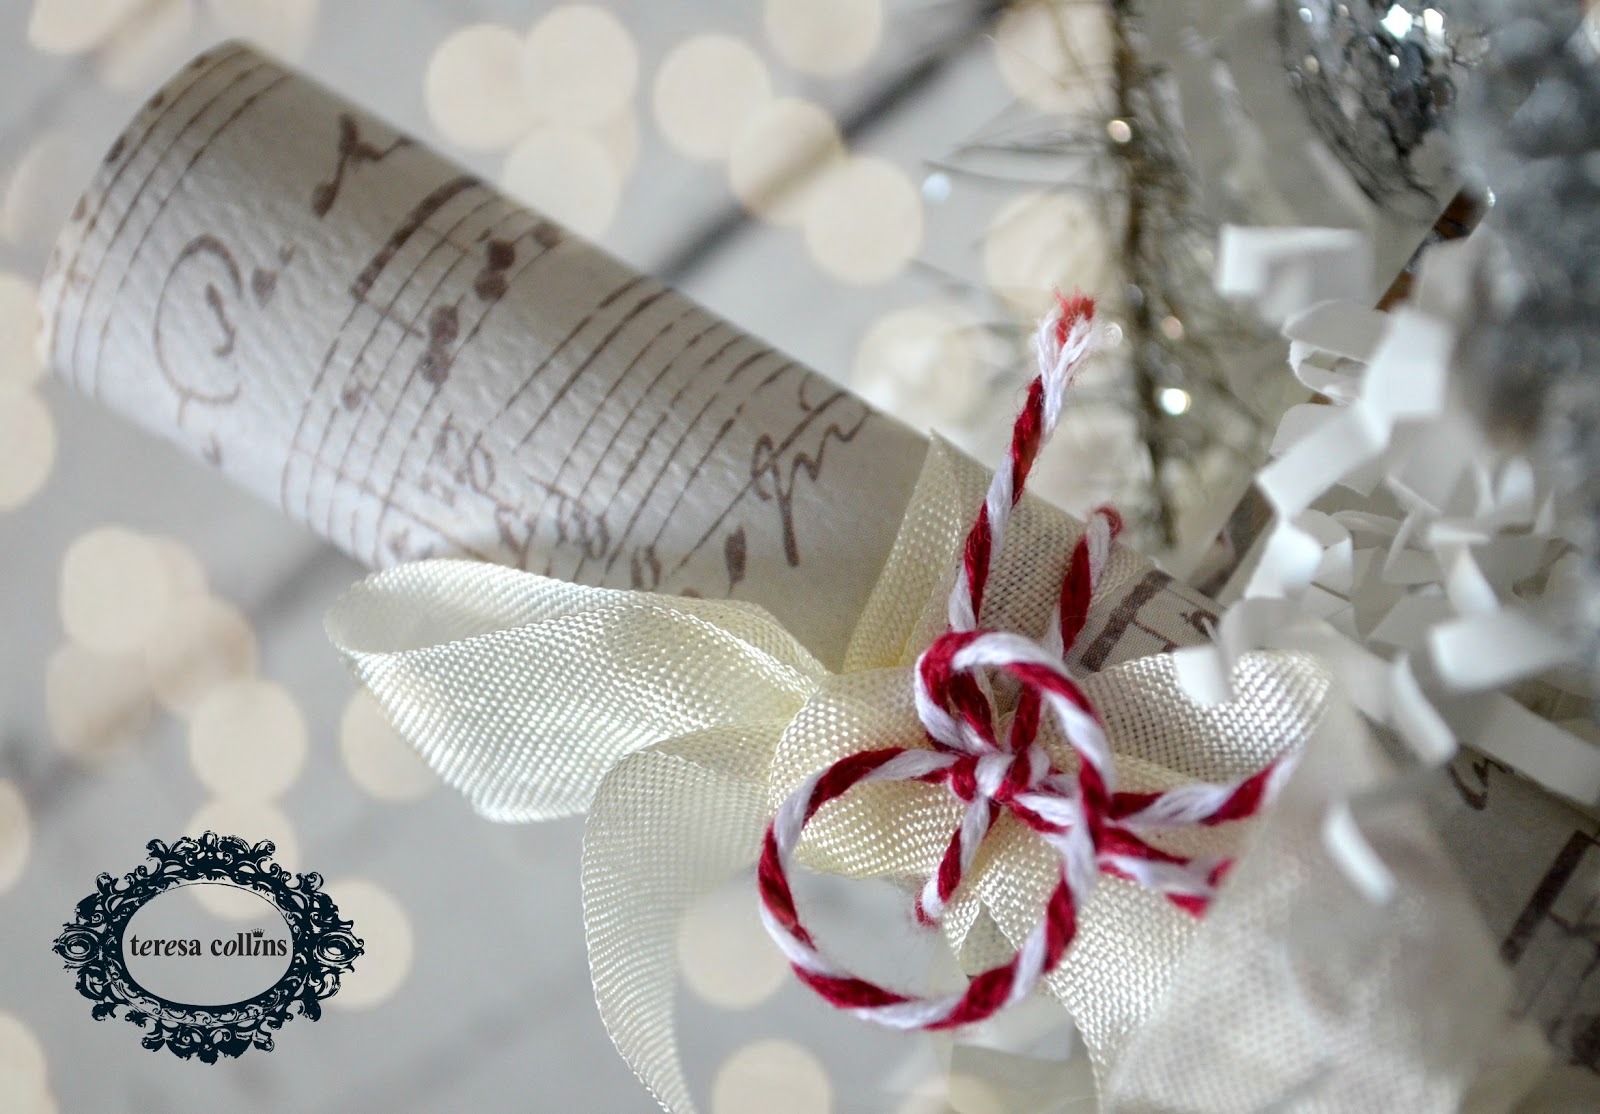 ... paper from the Christmas Cottage collection and tied it with ribbon